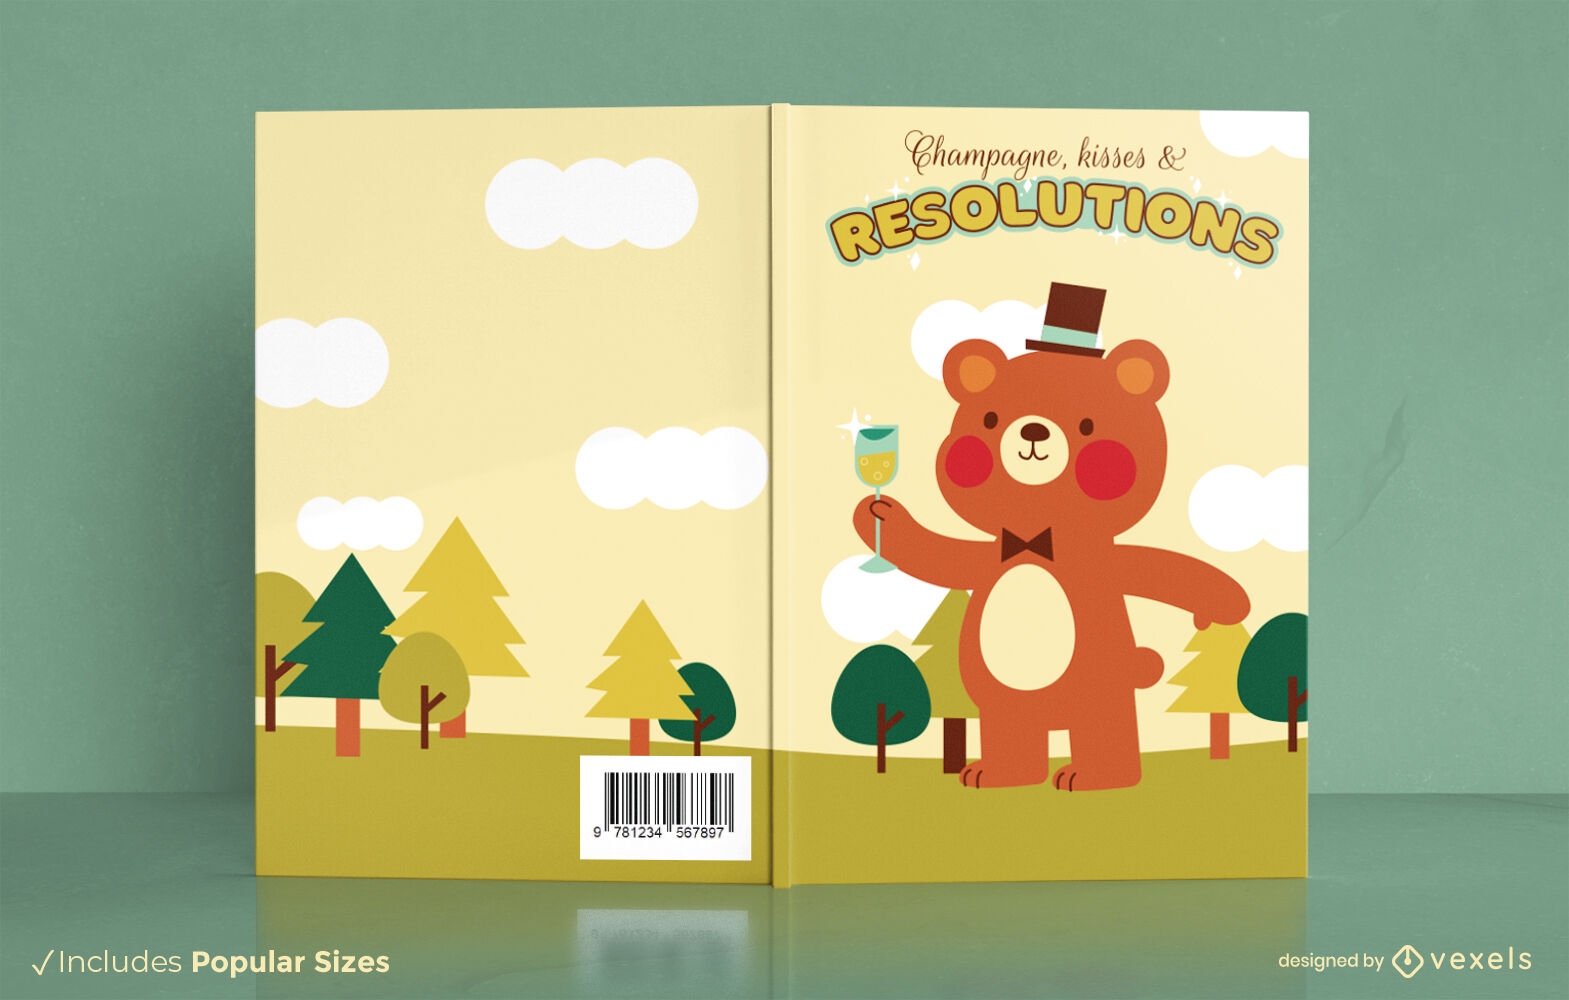 New Year resolutions book cover design